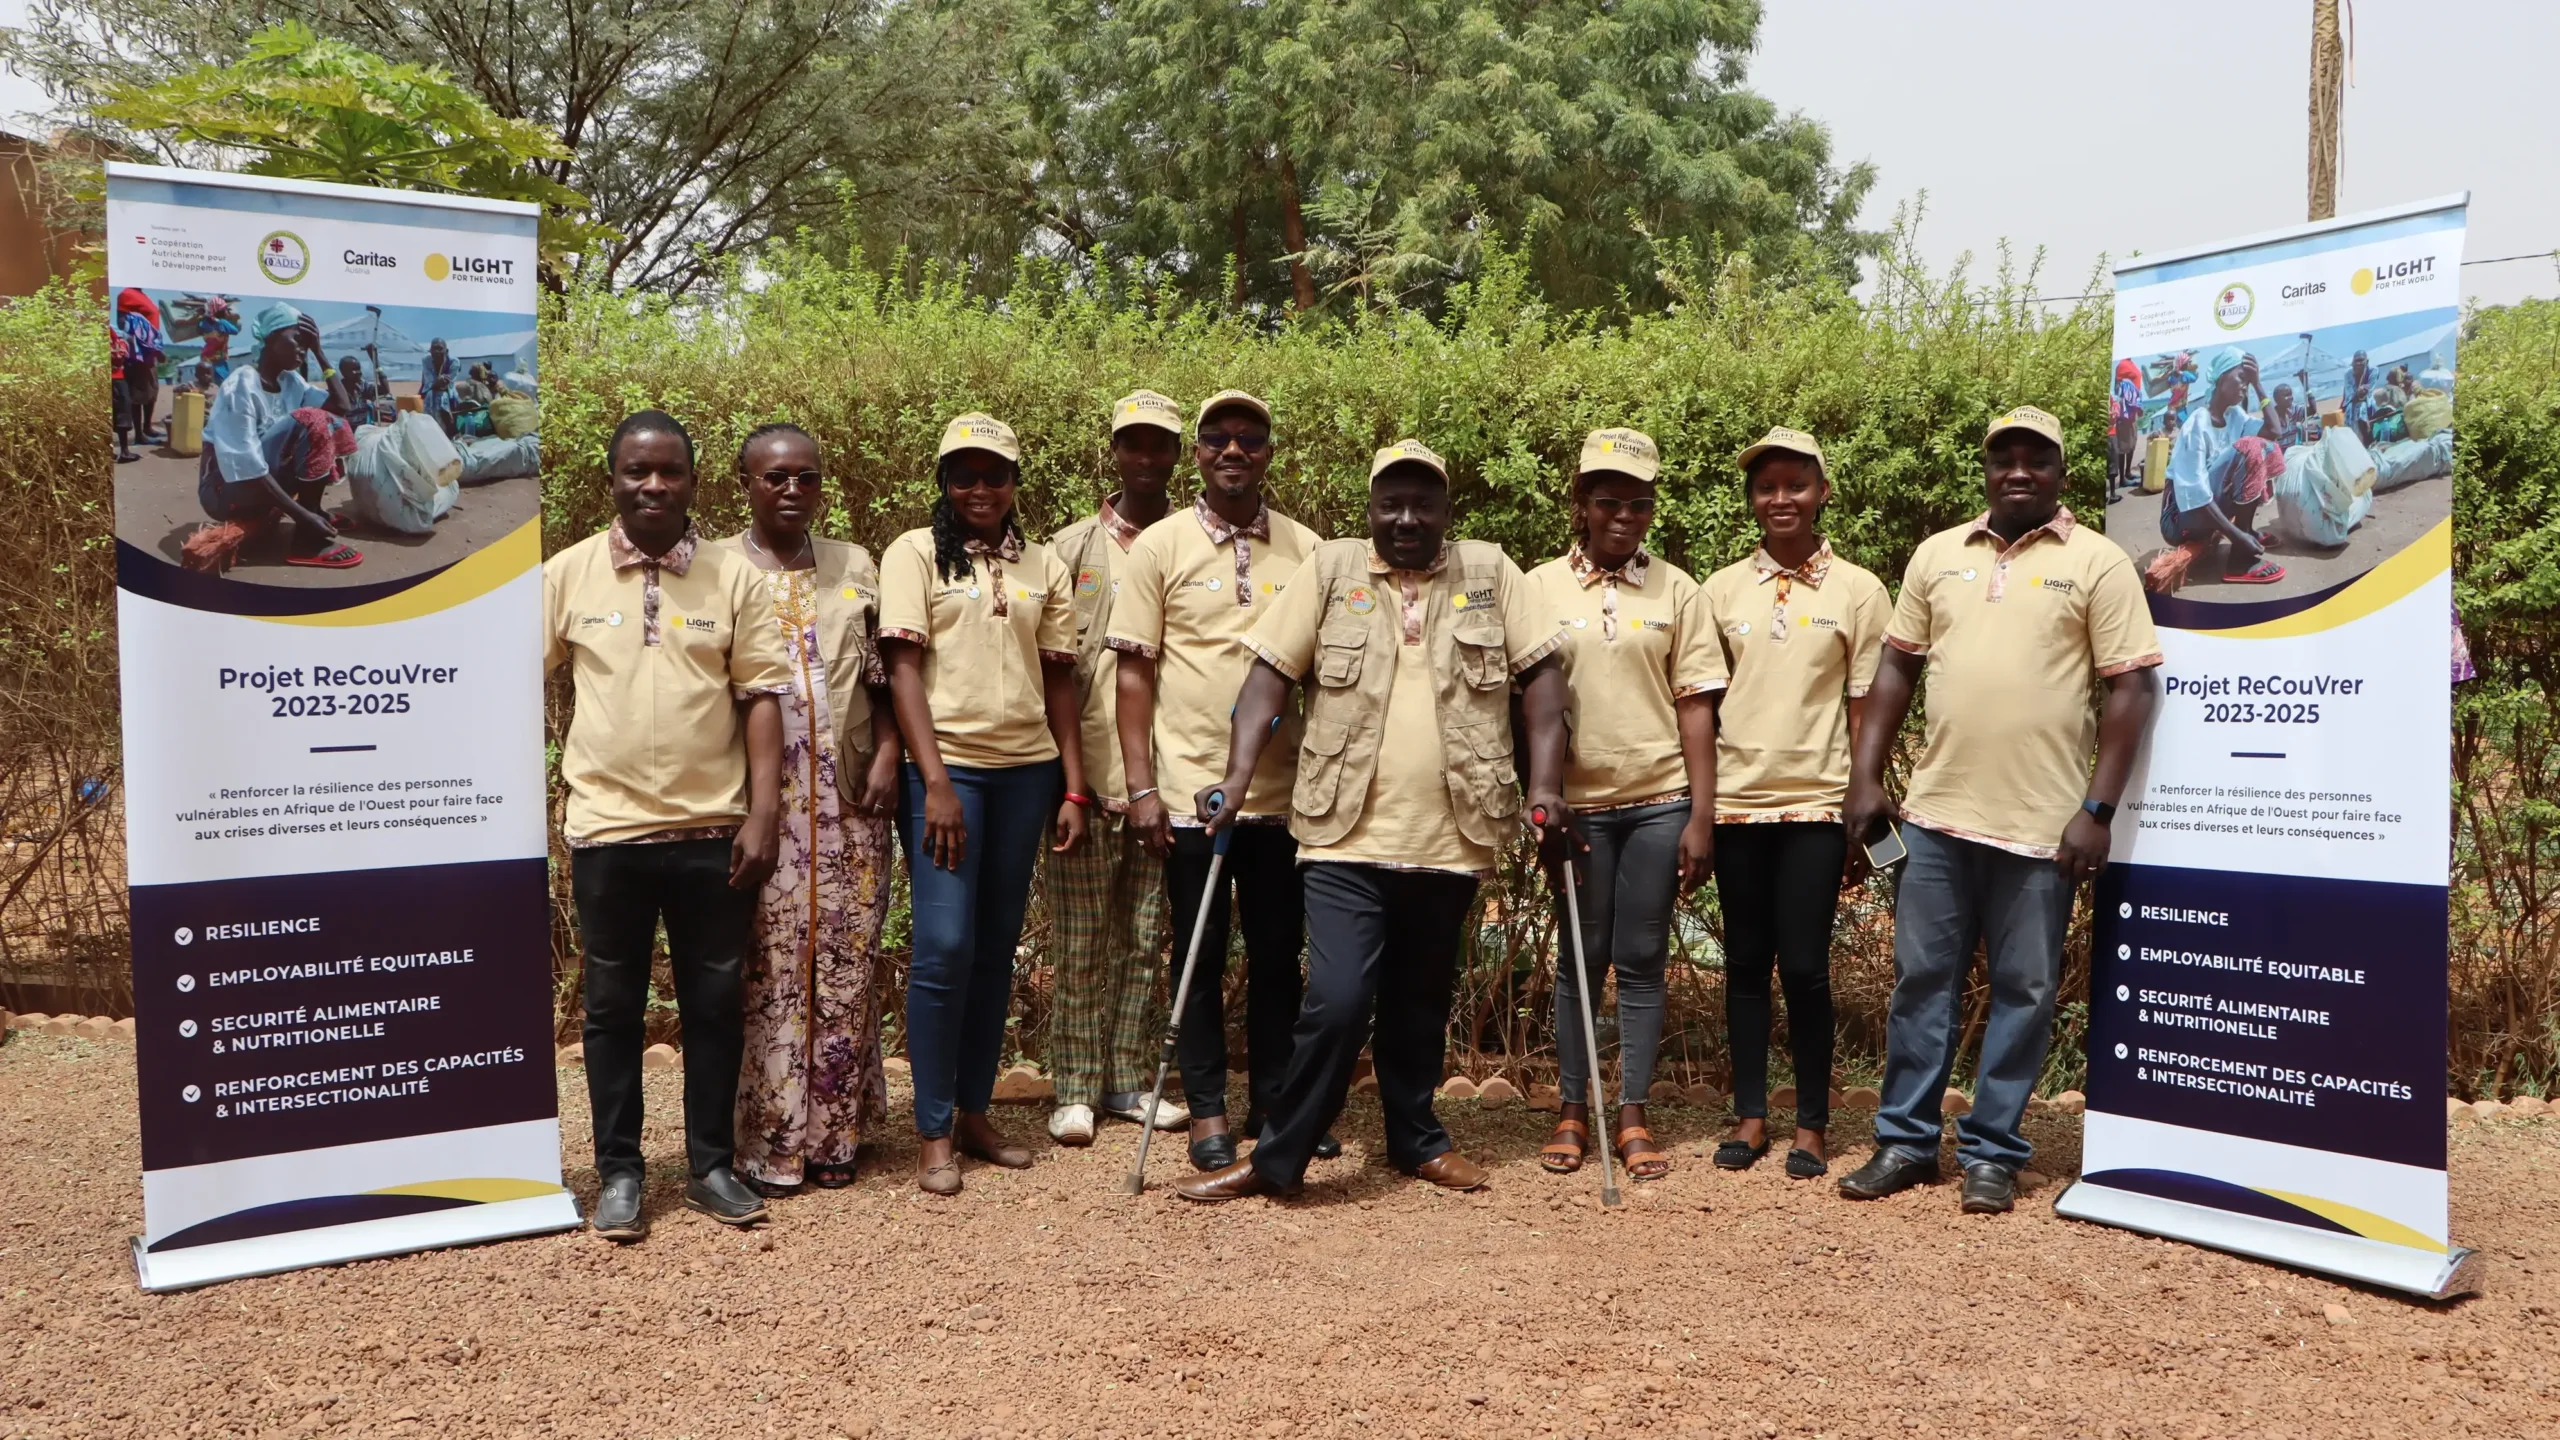 A group of people wearing beige Light for the World clothing and caps is posing for a group photo. The man in the middle is holding clutches. To both sides of the group stand info panes, giving information about the Recouvrer project.